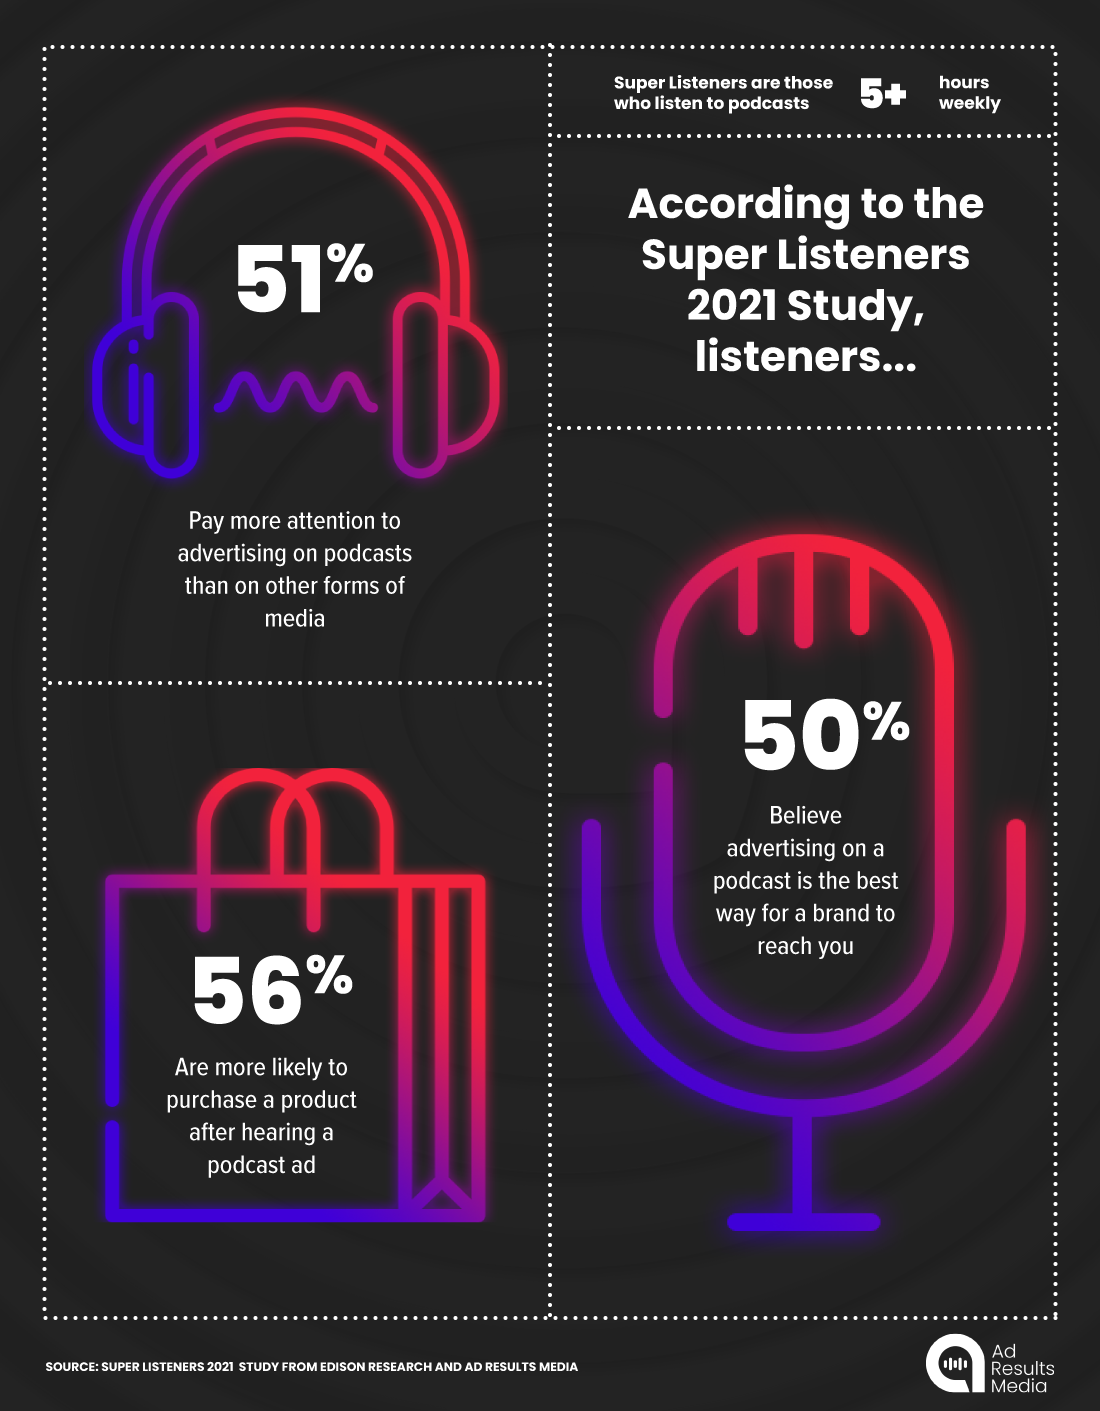 Super-Listeners-2021-Study-by-Edison-Research-and-Ad-Results-Media_podcast-advertising